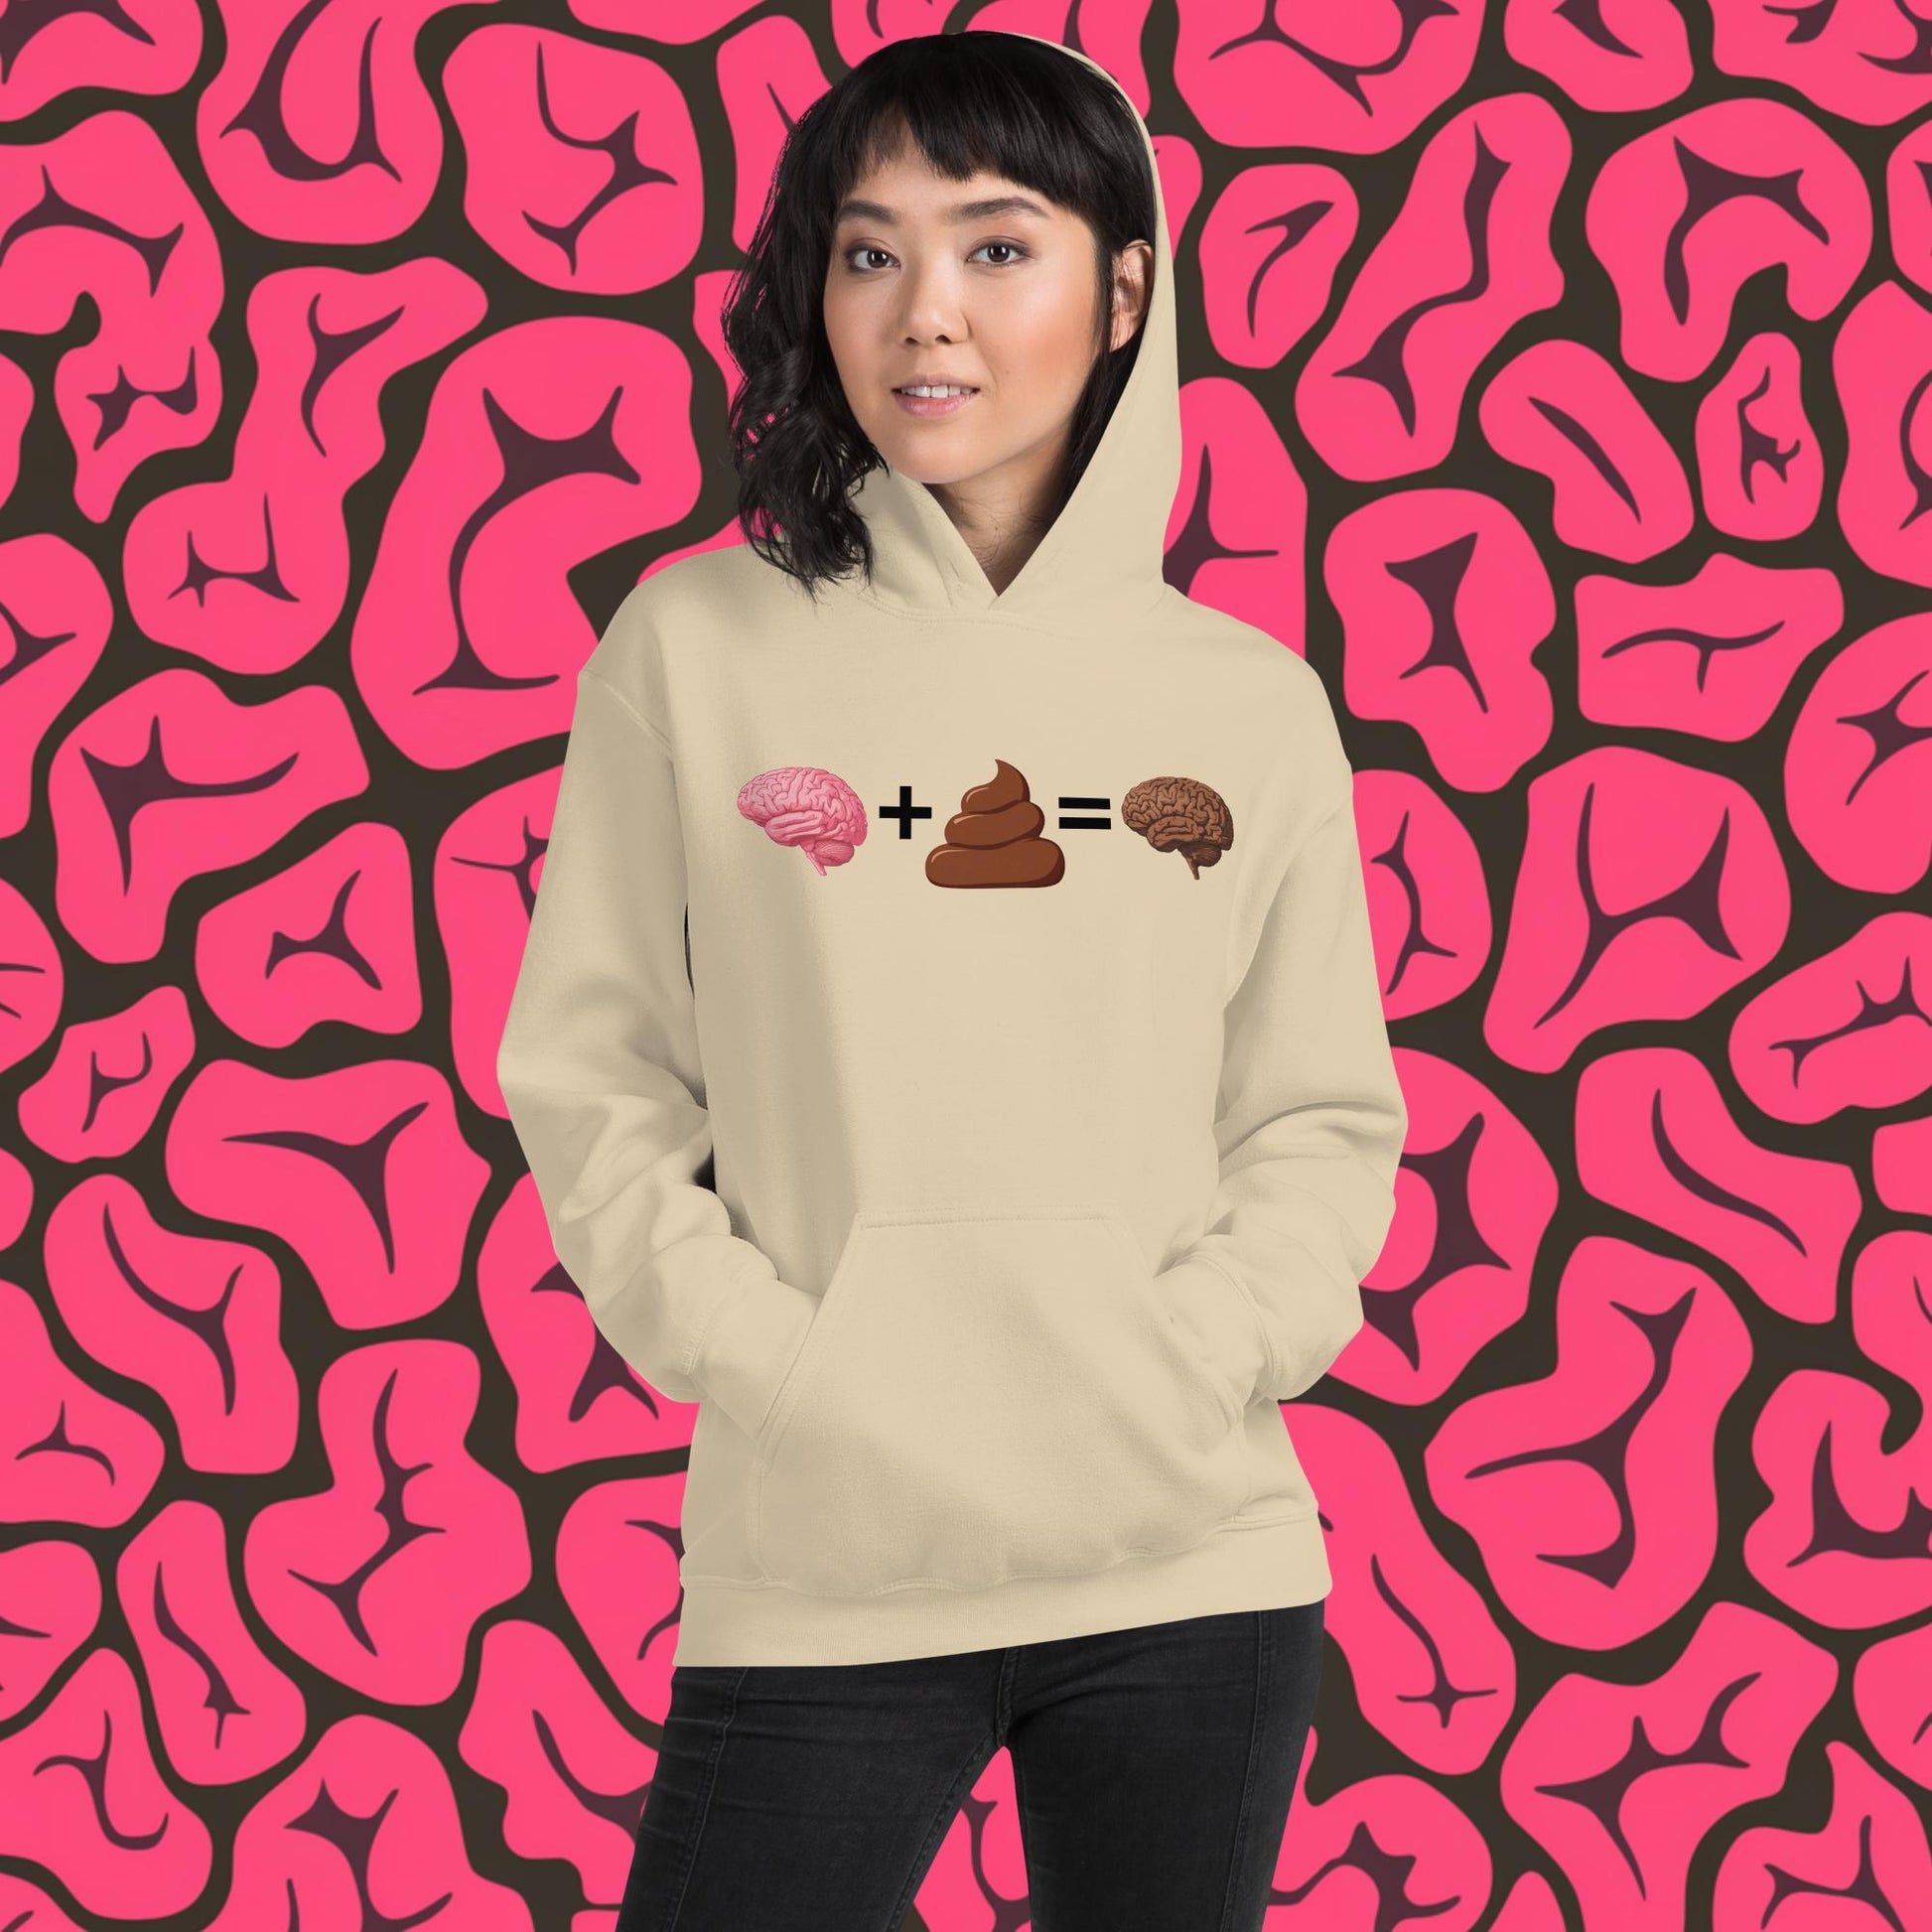 Poo for Brains Funny Math Equation Unisex Hoodie Next Cult Brand